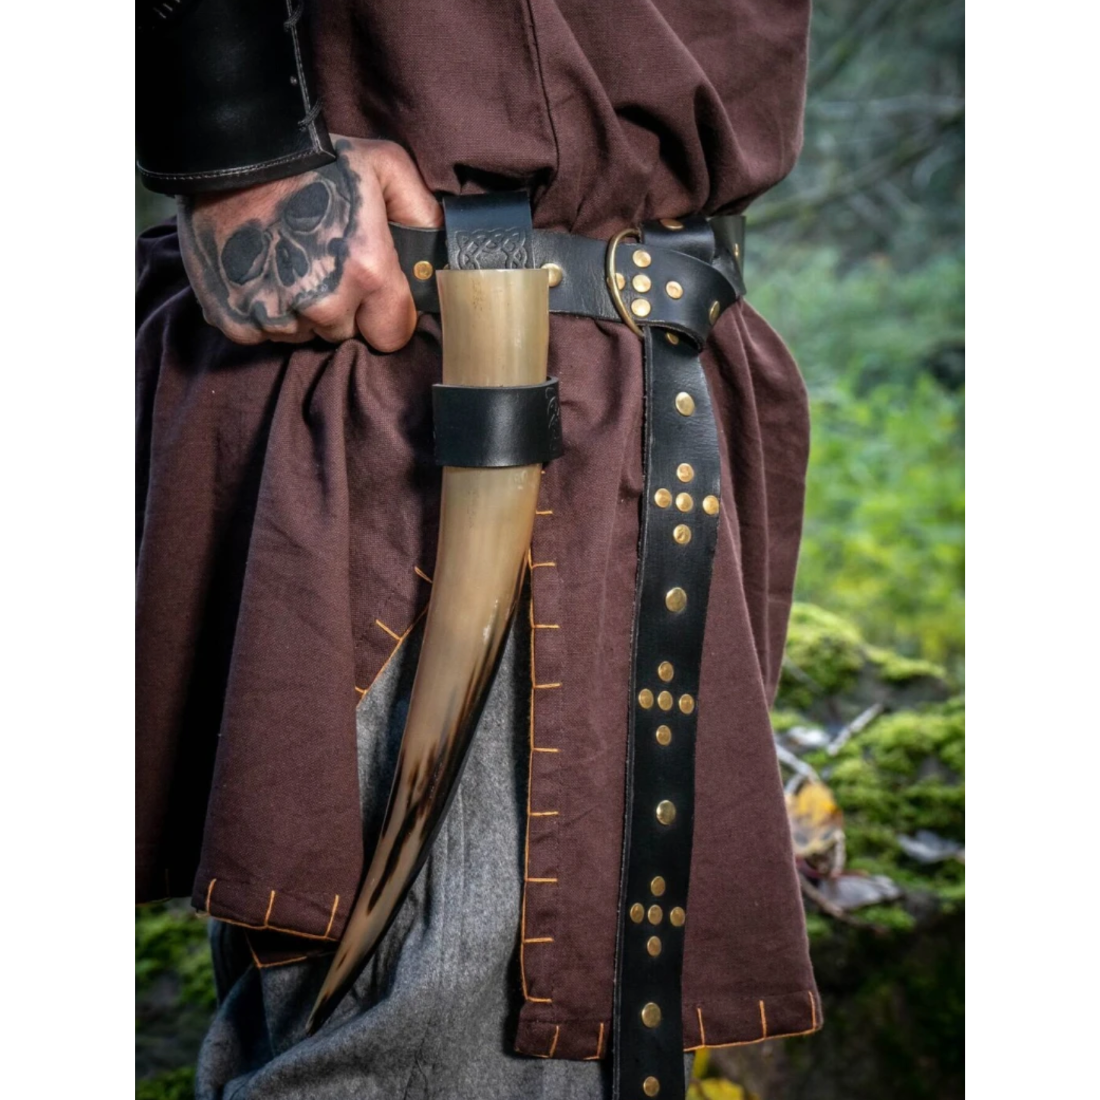 Riveted Thick Leather Pirate Belt - Black Ring Loop Knotted Belt